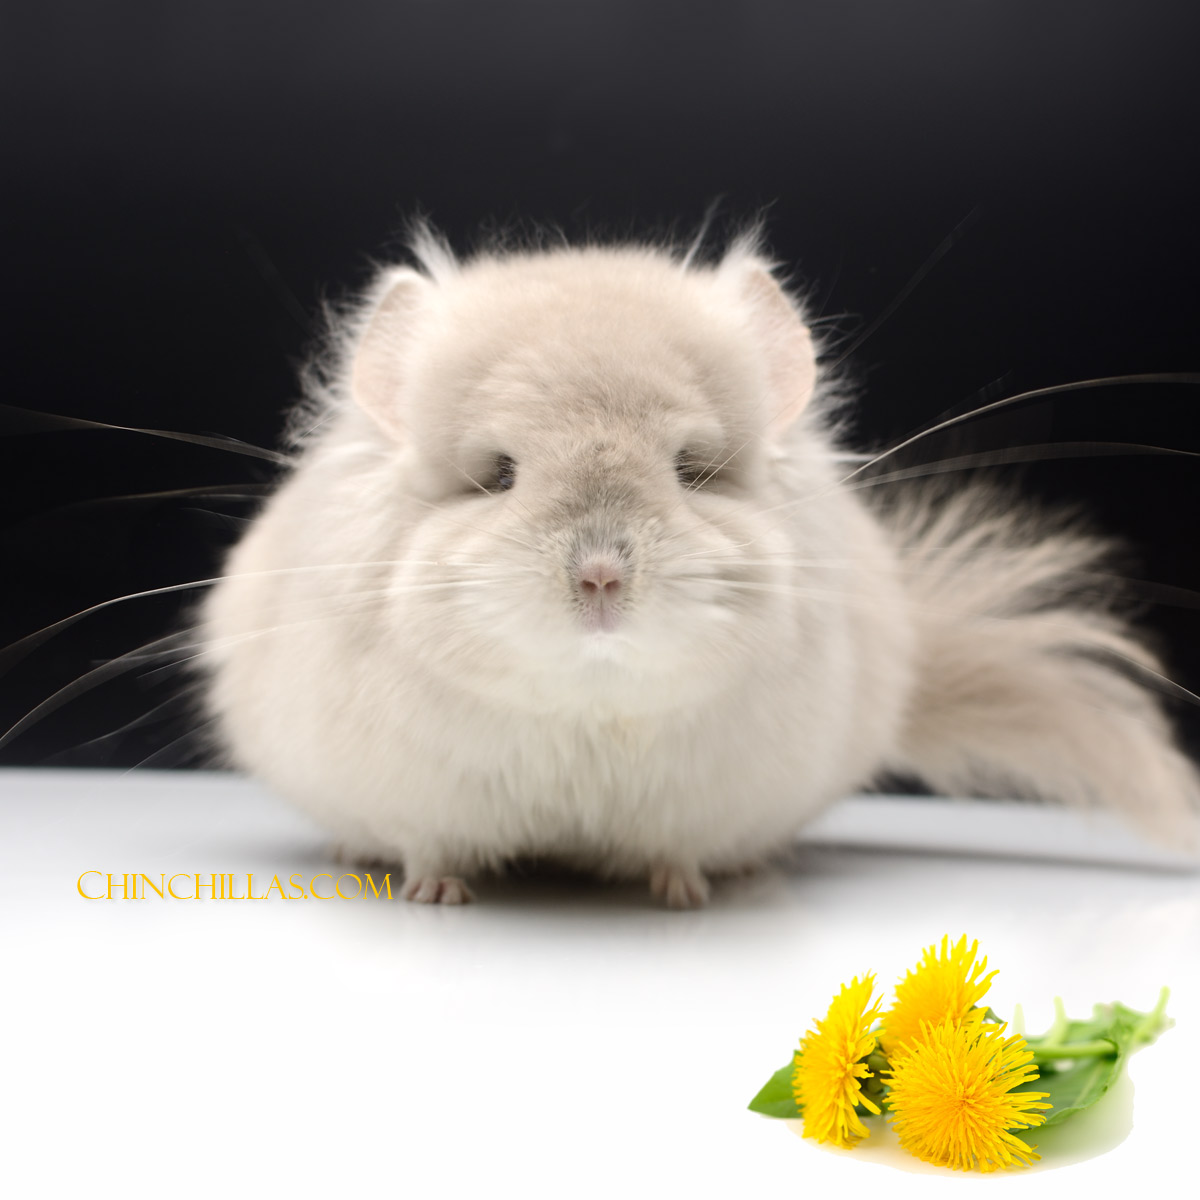 Dandelions have many health benefits for chinchillas